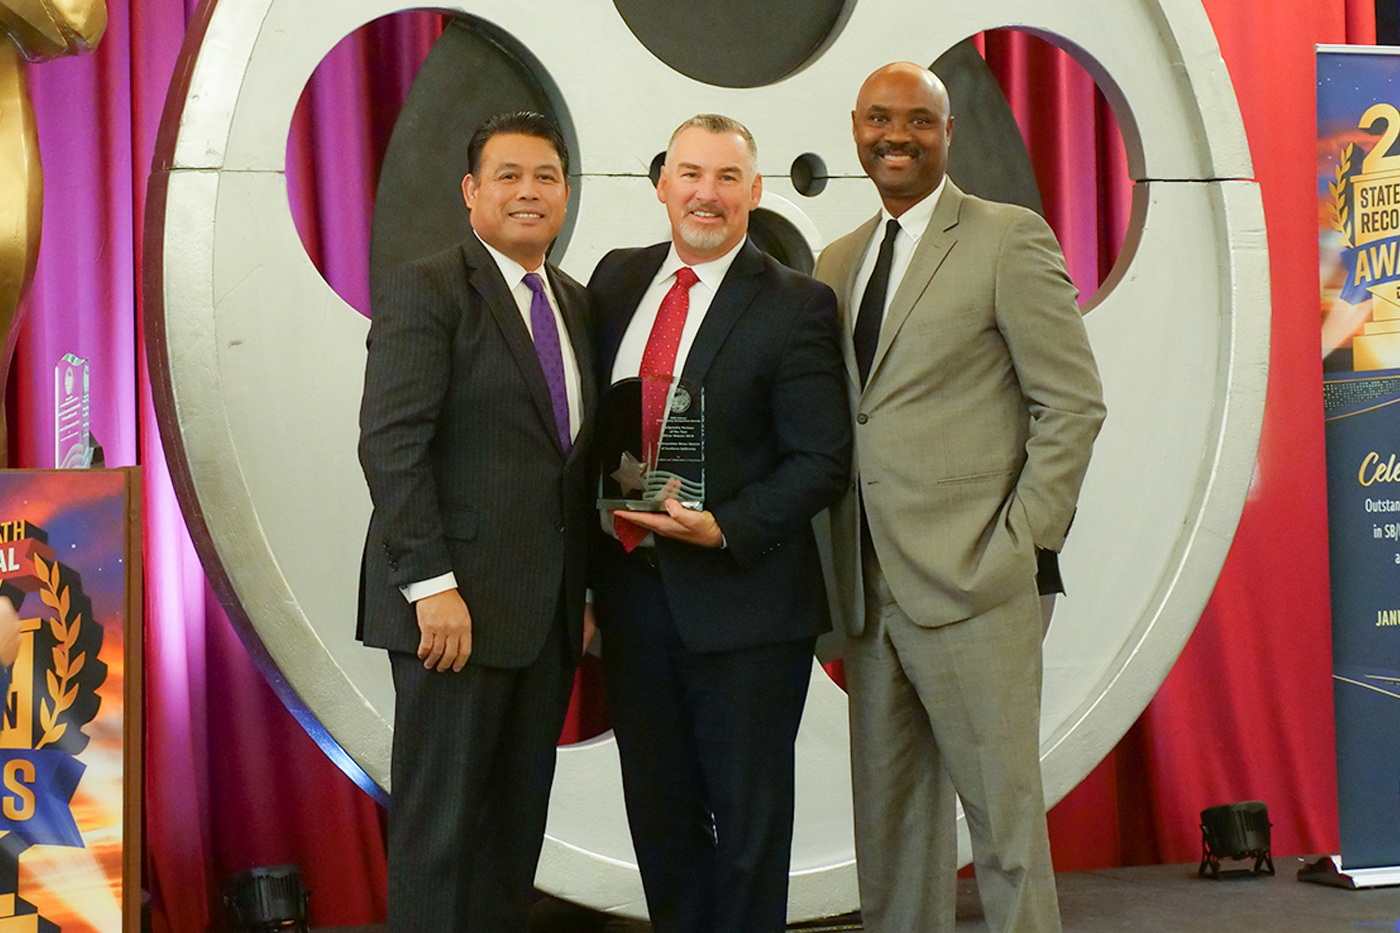  Julian Canete, President and CEO of the California Hispanic Chambers of Commerce, presents the Metropolitan Water District of Southern California with the Silver Reciprocity Partner of the Year award.